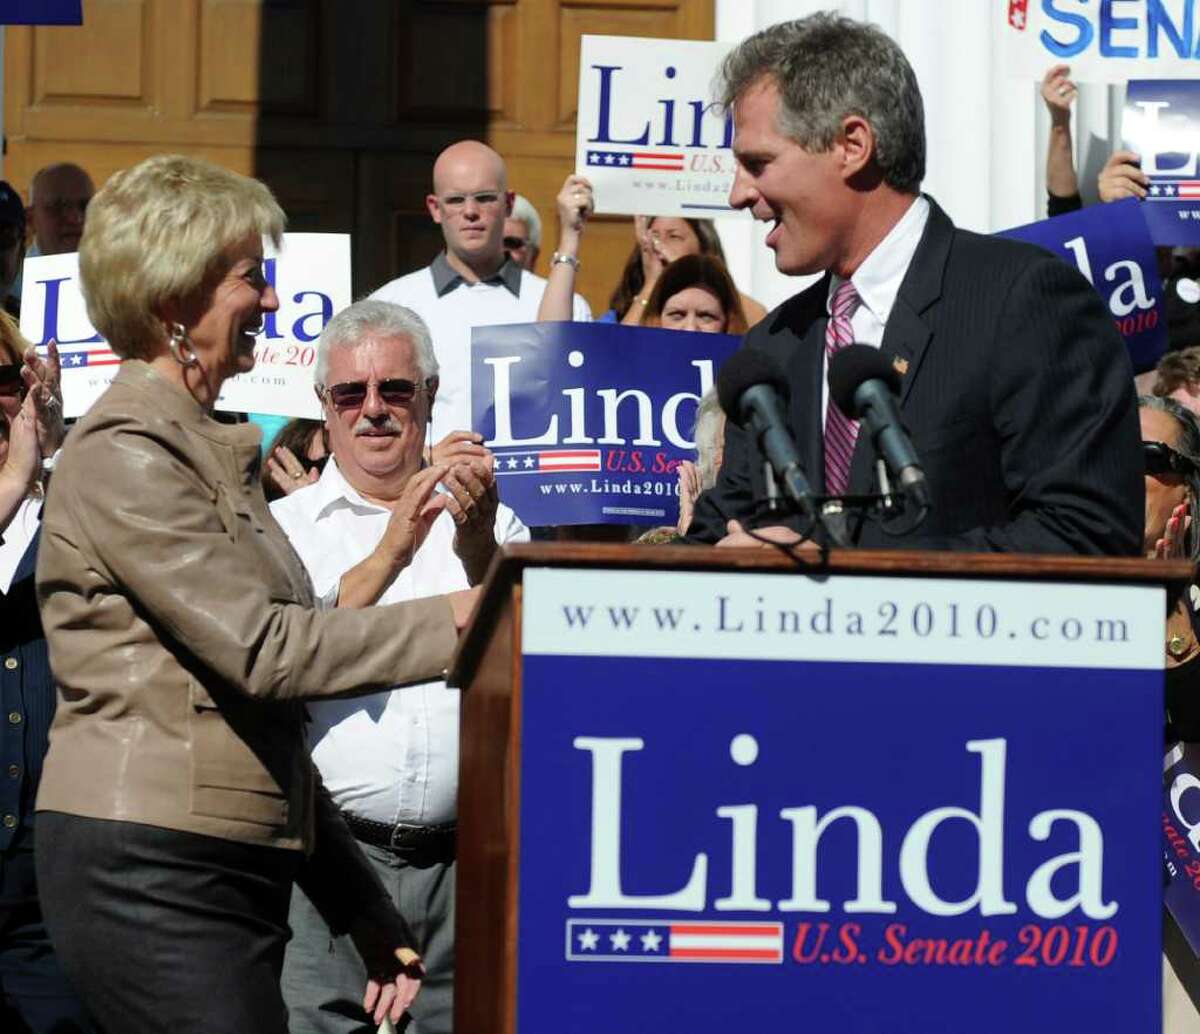 Linda McMahon, left, and Massachusetts senator Scott Brown, right, shake hands after Brown introduced McMahon during a rally in Milford on Saturday, October 9, 2010.